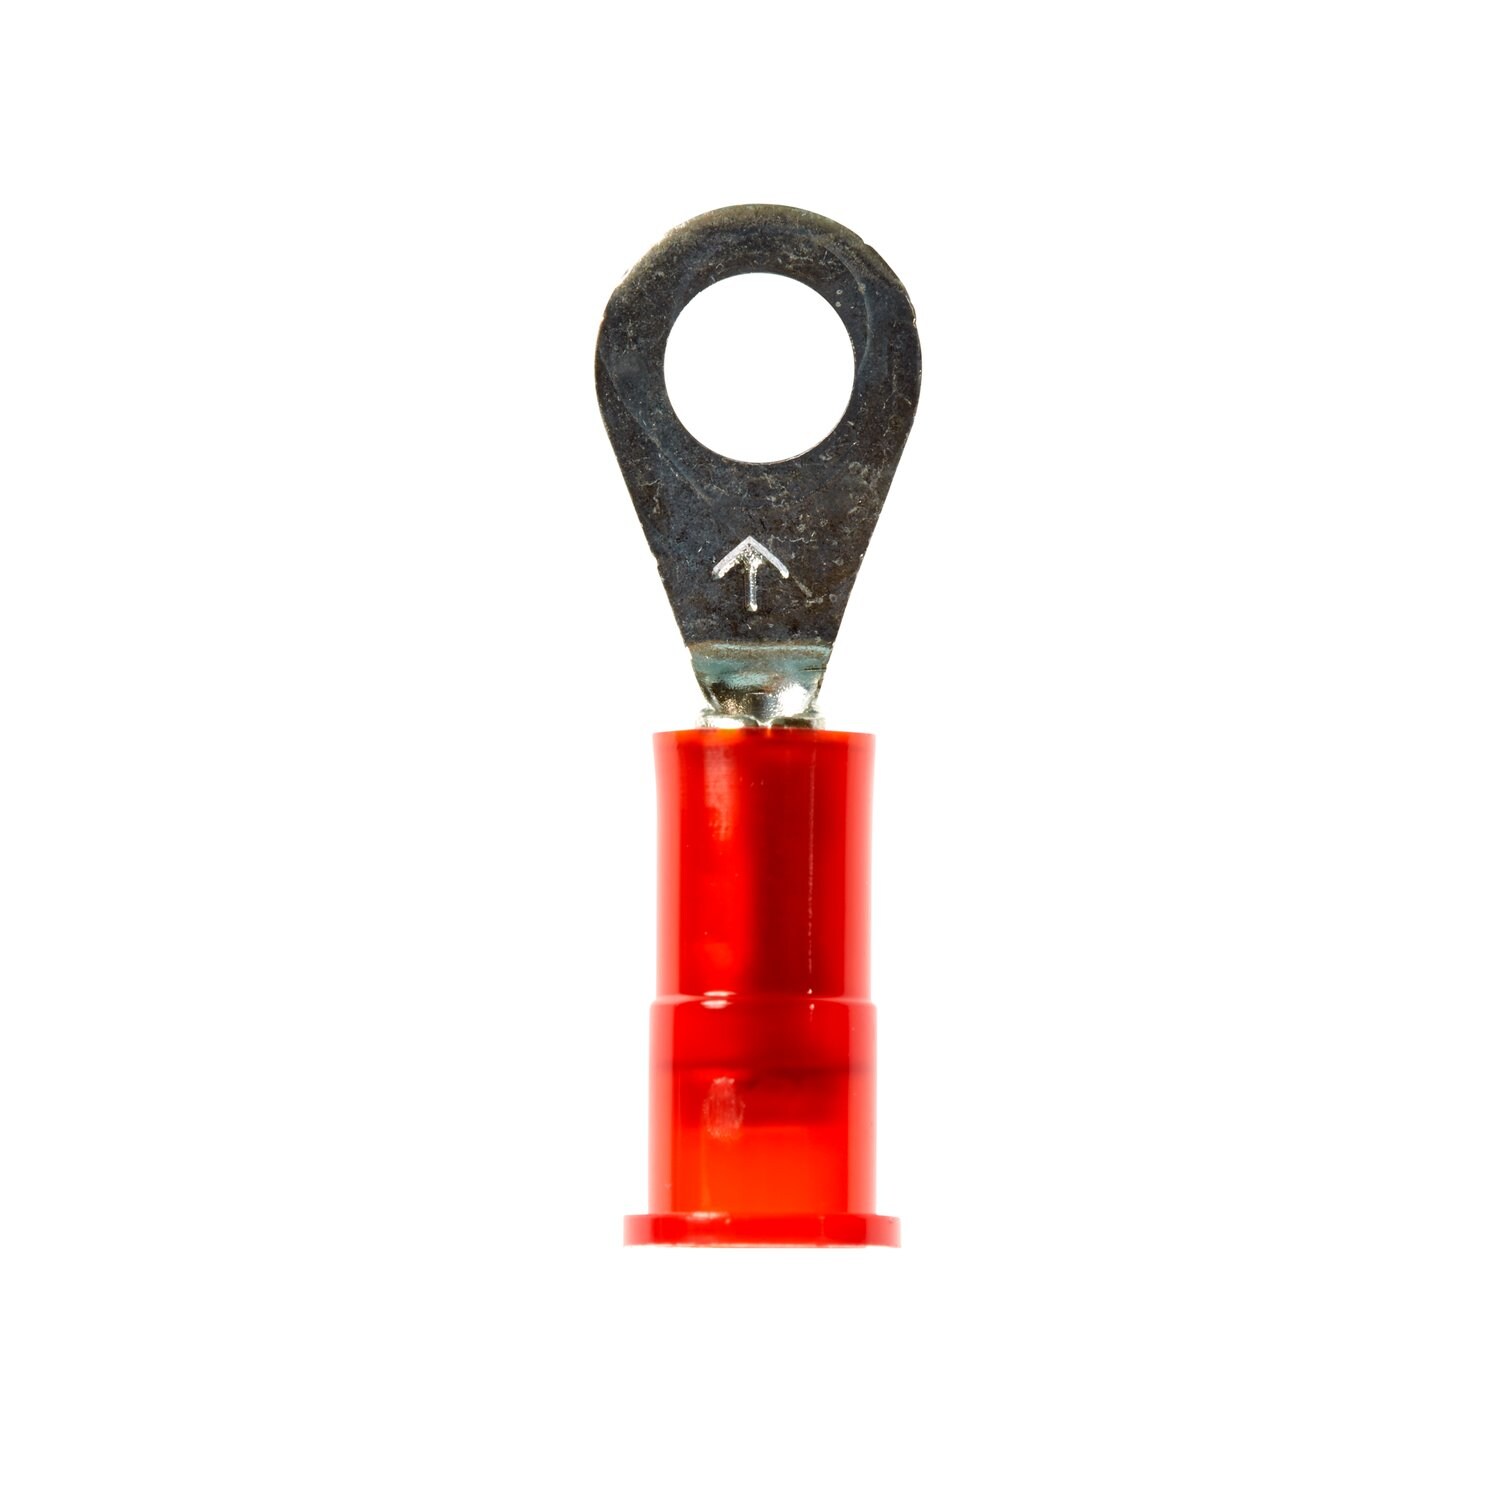 7100163928 - 3M Scotchlok Ring Tongue, Nylon Insulated w/Insulation Grip
MNG18-8R/LK, Stud Size 8, 1000/Case